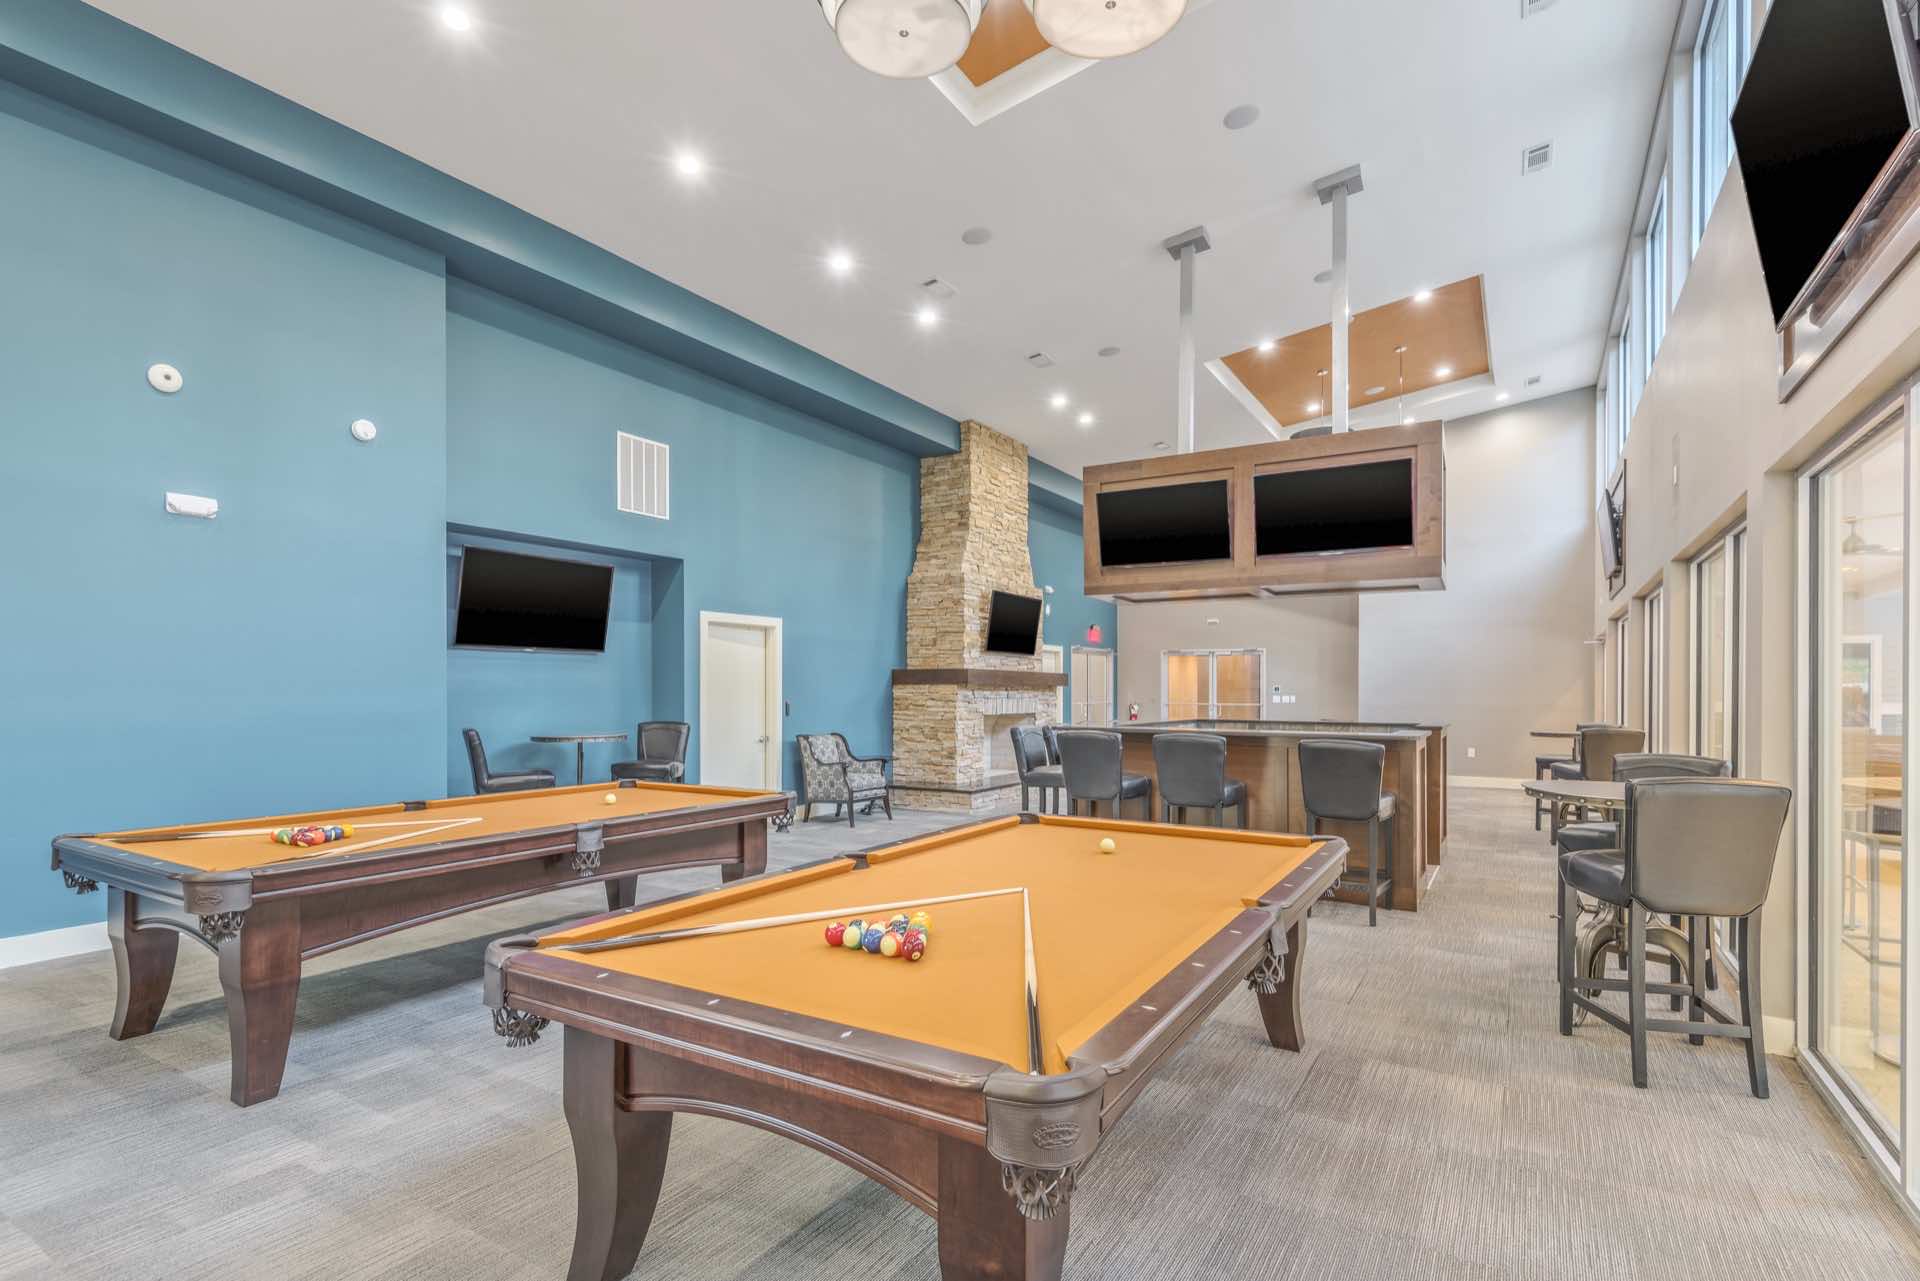 enjoy a game of billiards in the community room